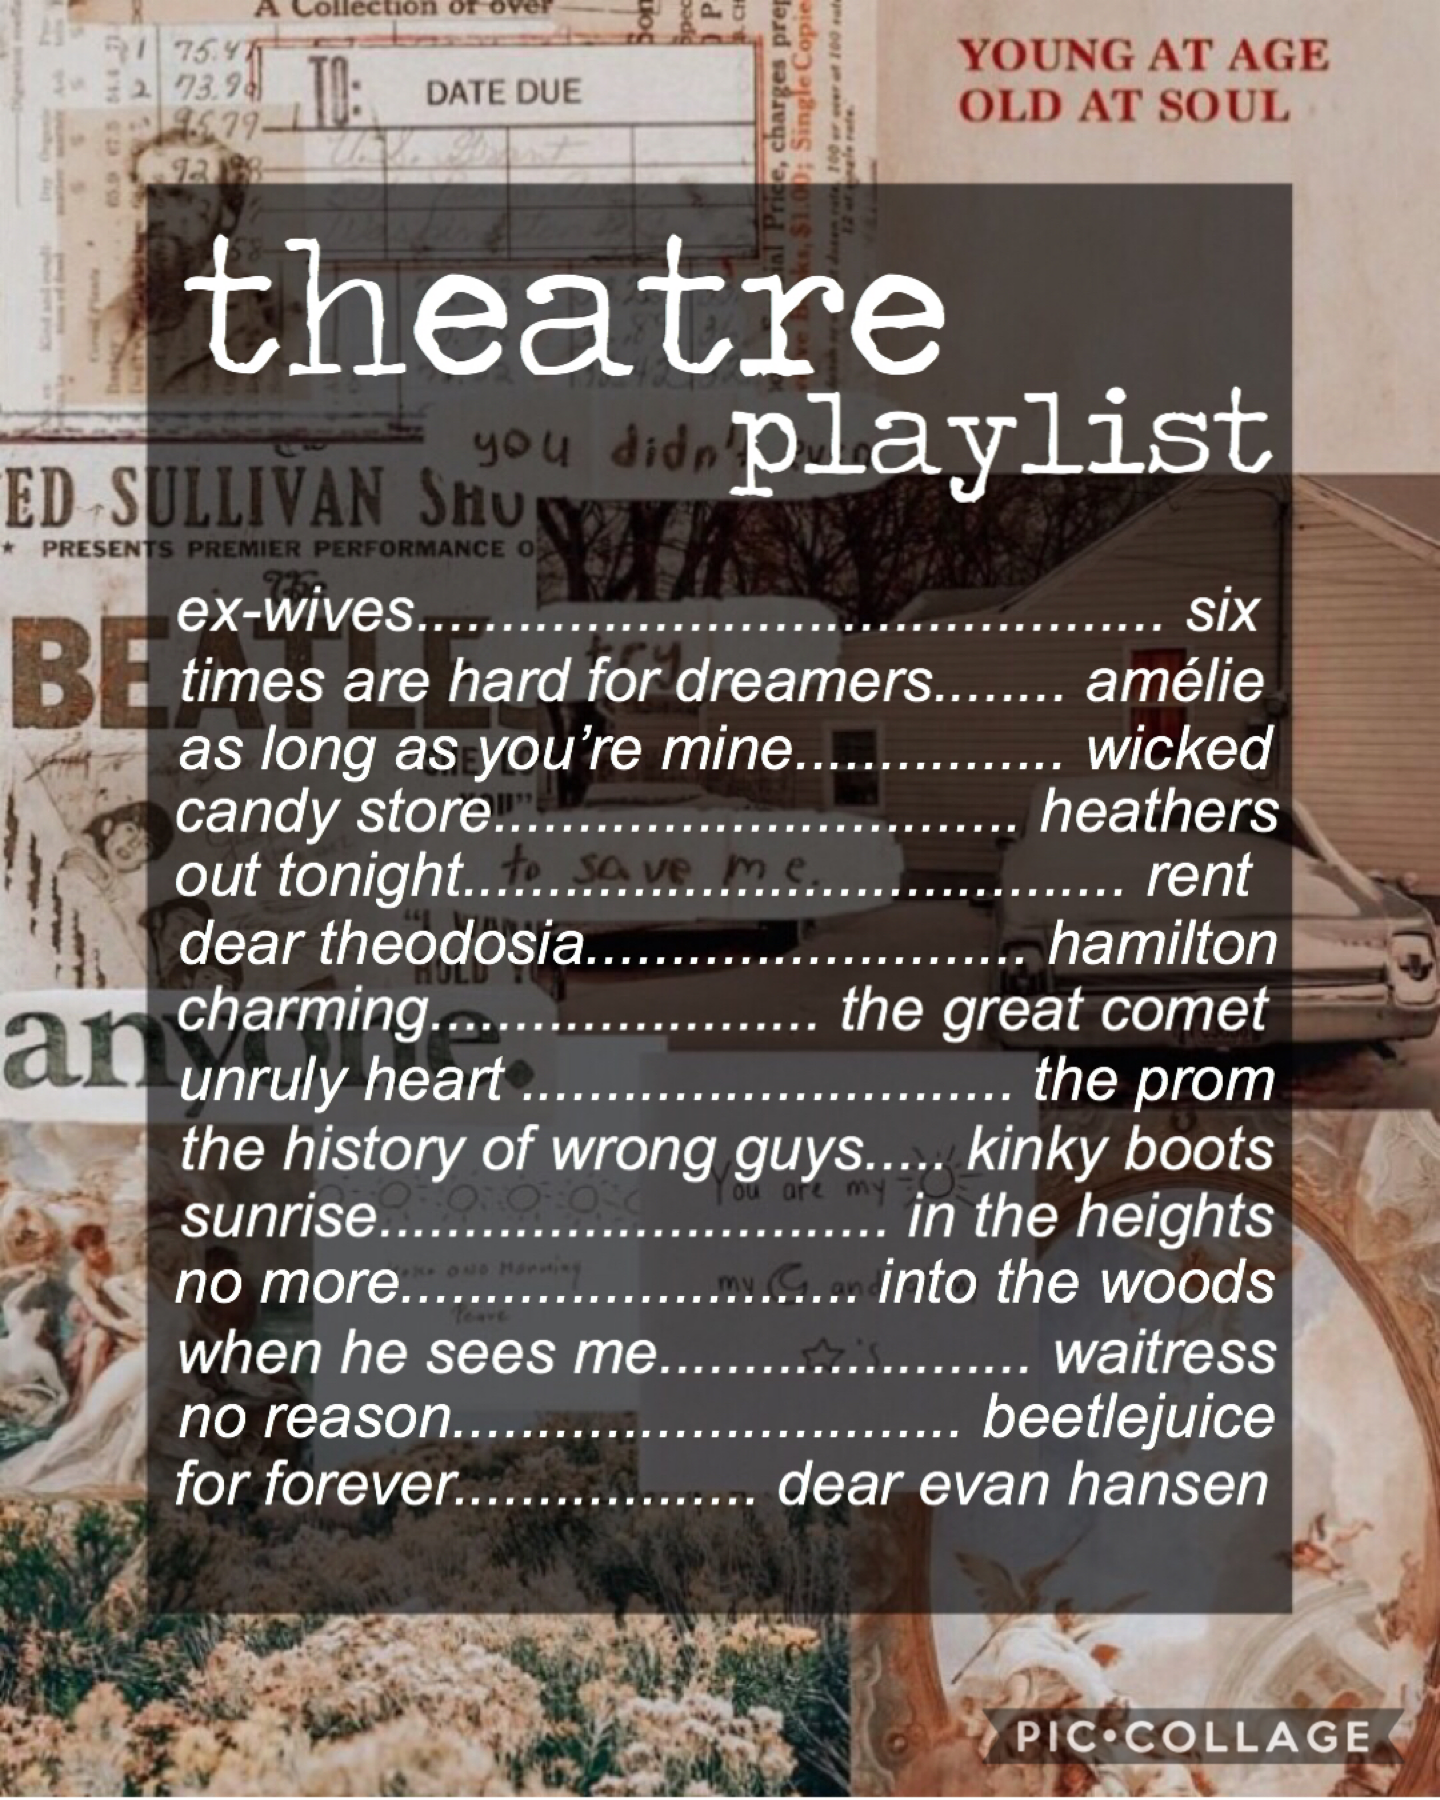 tappers!
here’s a random theatre playlist because musicals are all I ever listen to👏